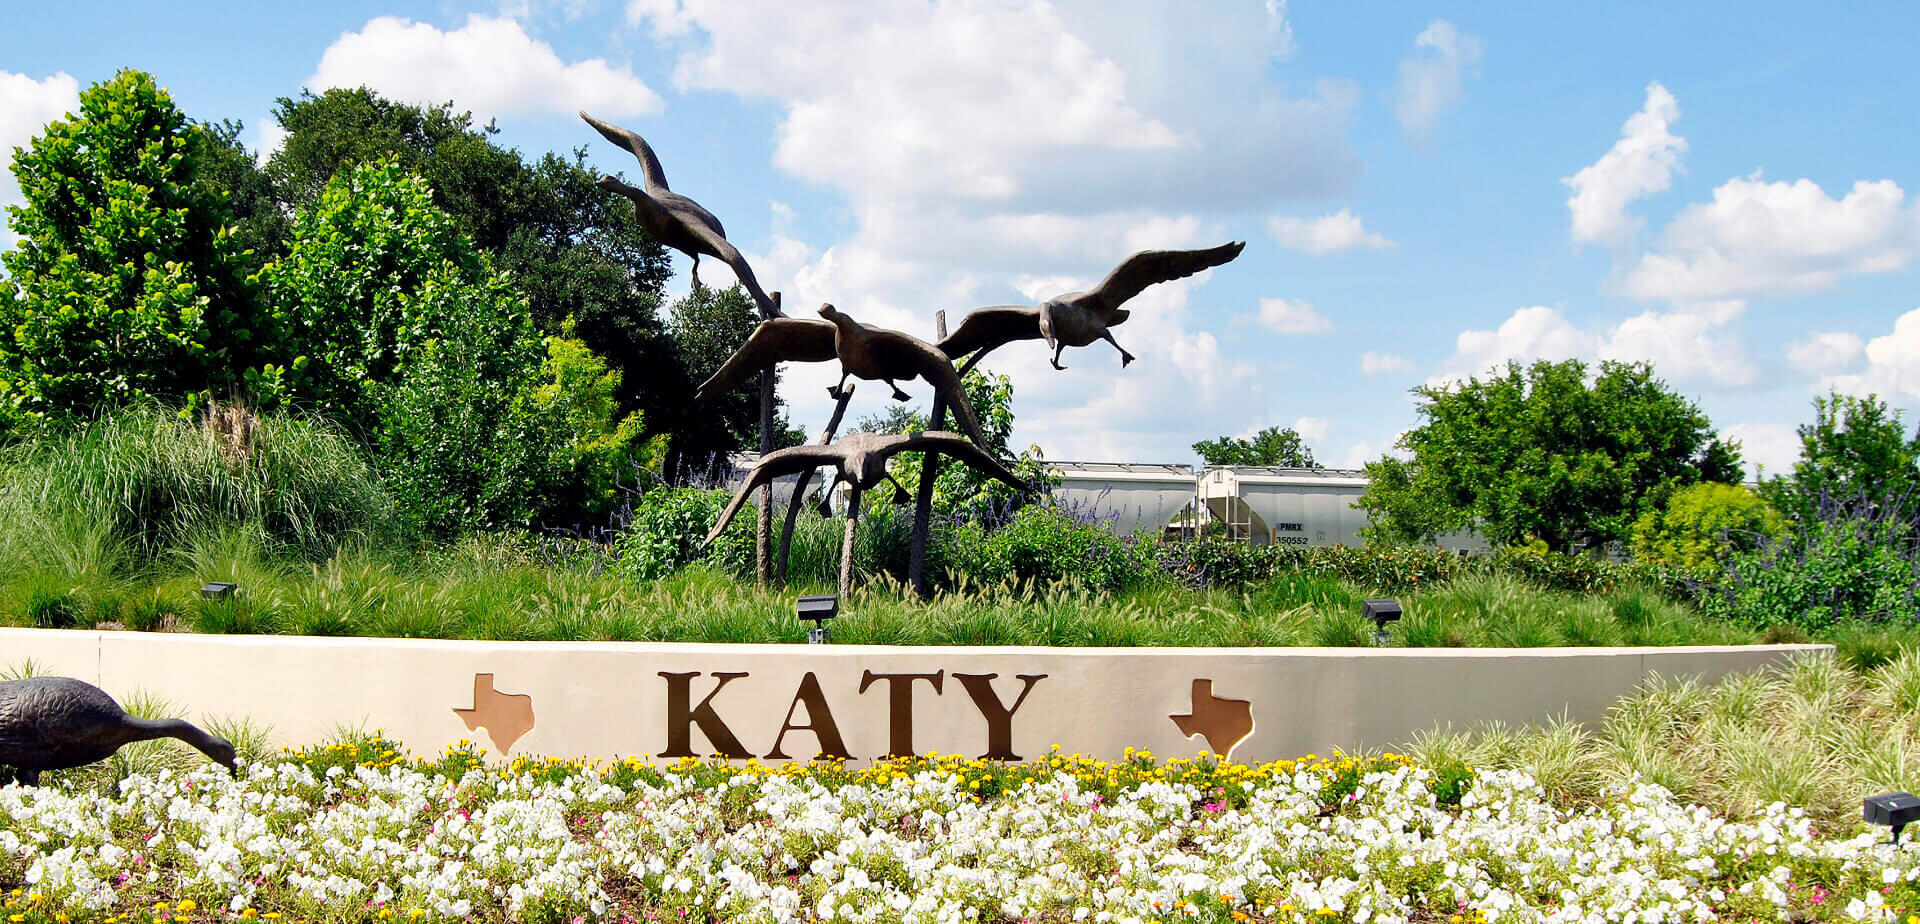 Home care services in katy